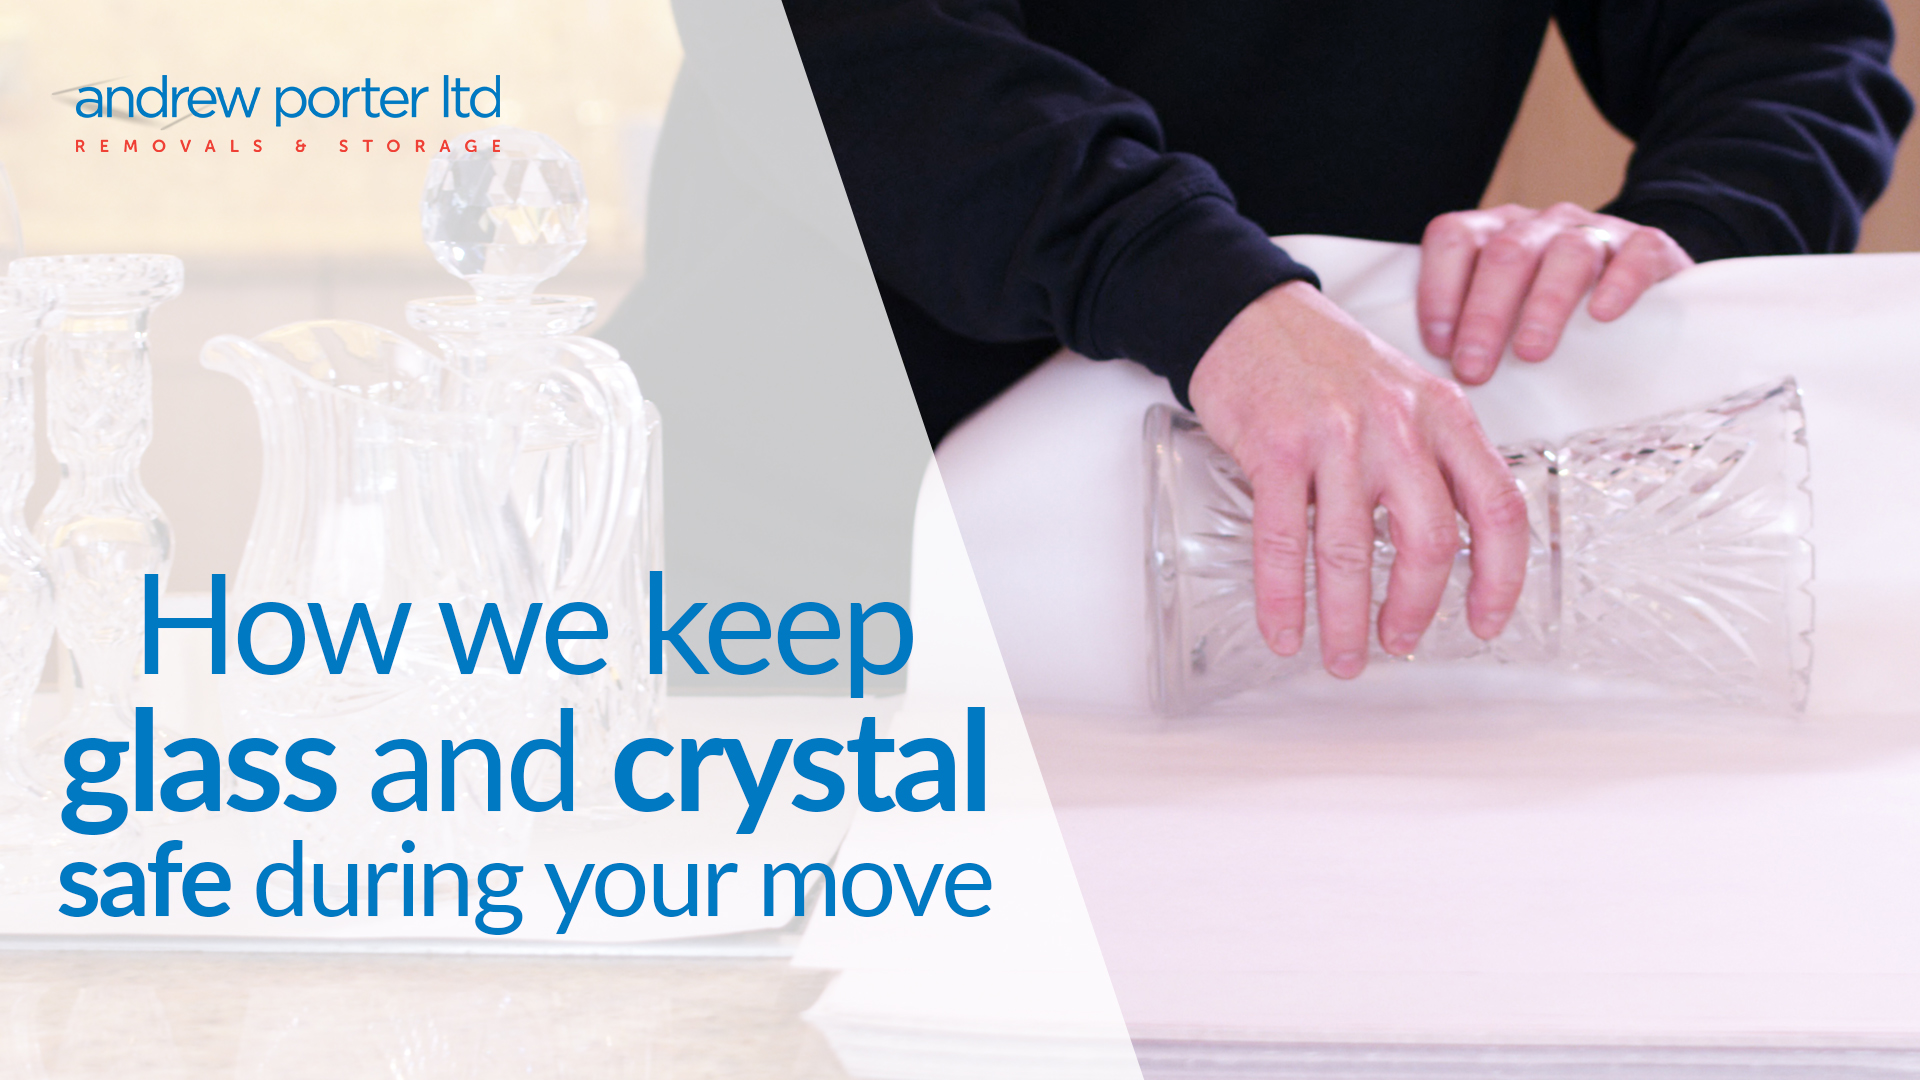 Keep your glass and crystal safe during your move